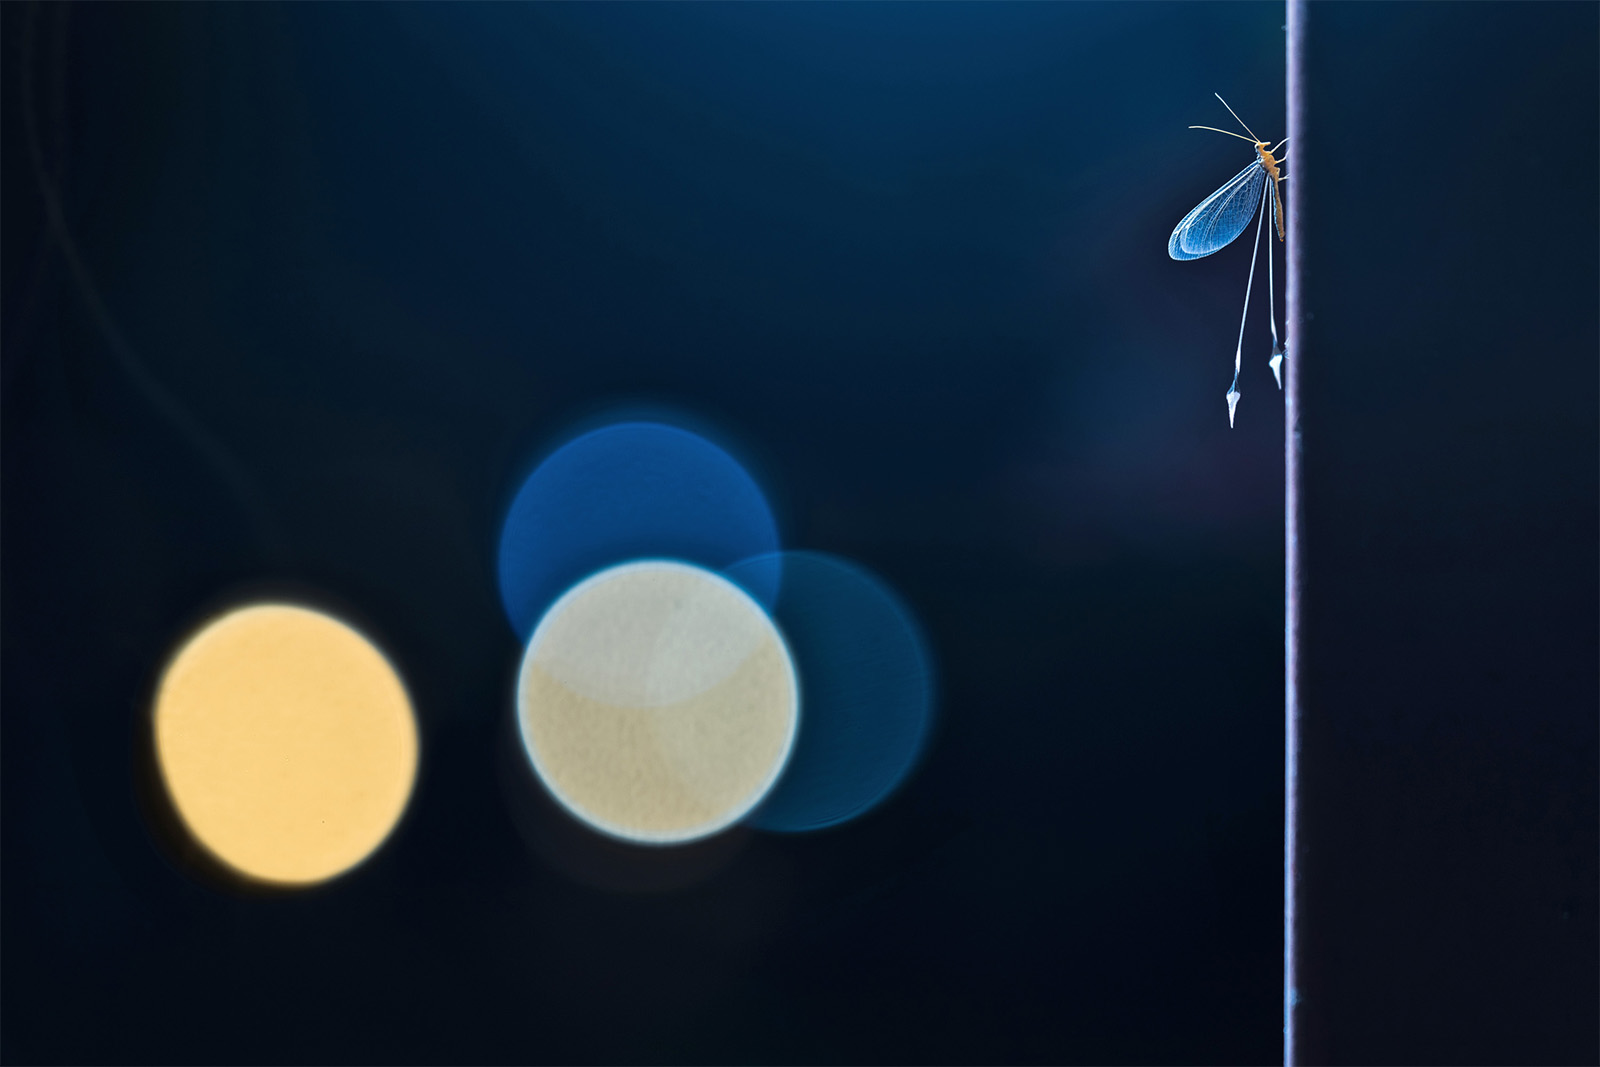 A macro shot of a small insect with delicate wings perched on a thin vertical surface against a dark blue background. Three out-of-focus circular lights in shades of blue and yellow create a bokeh effect in the background.